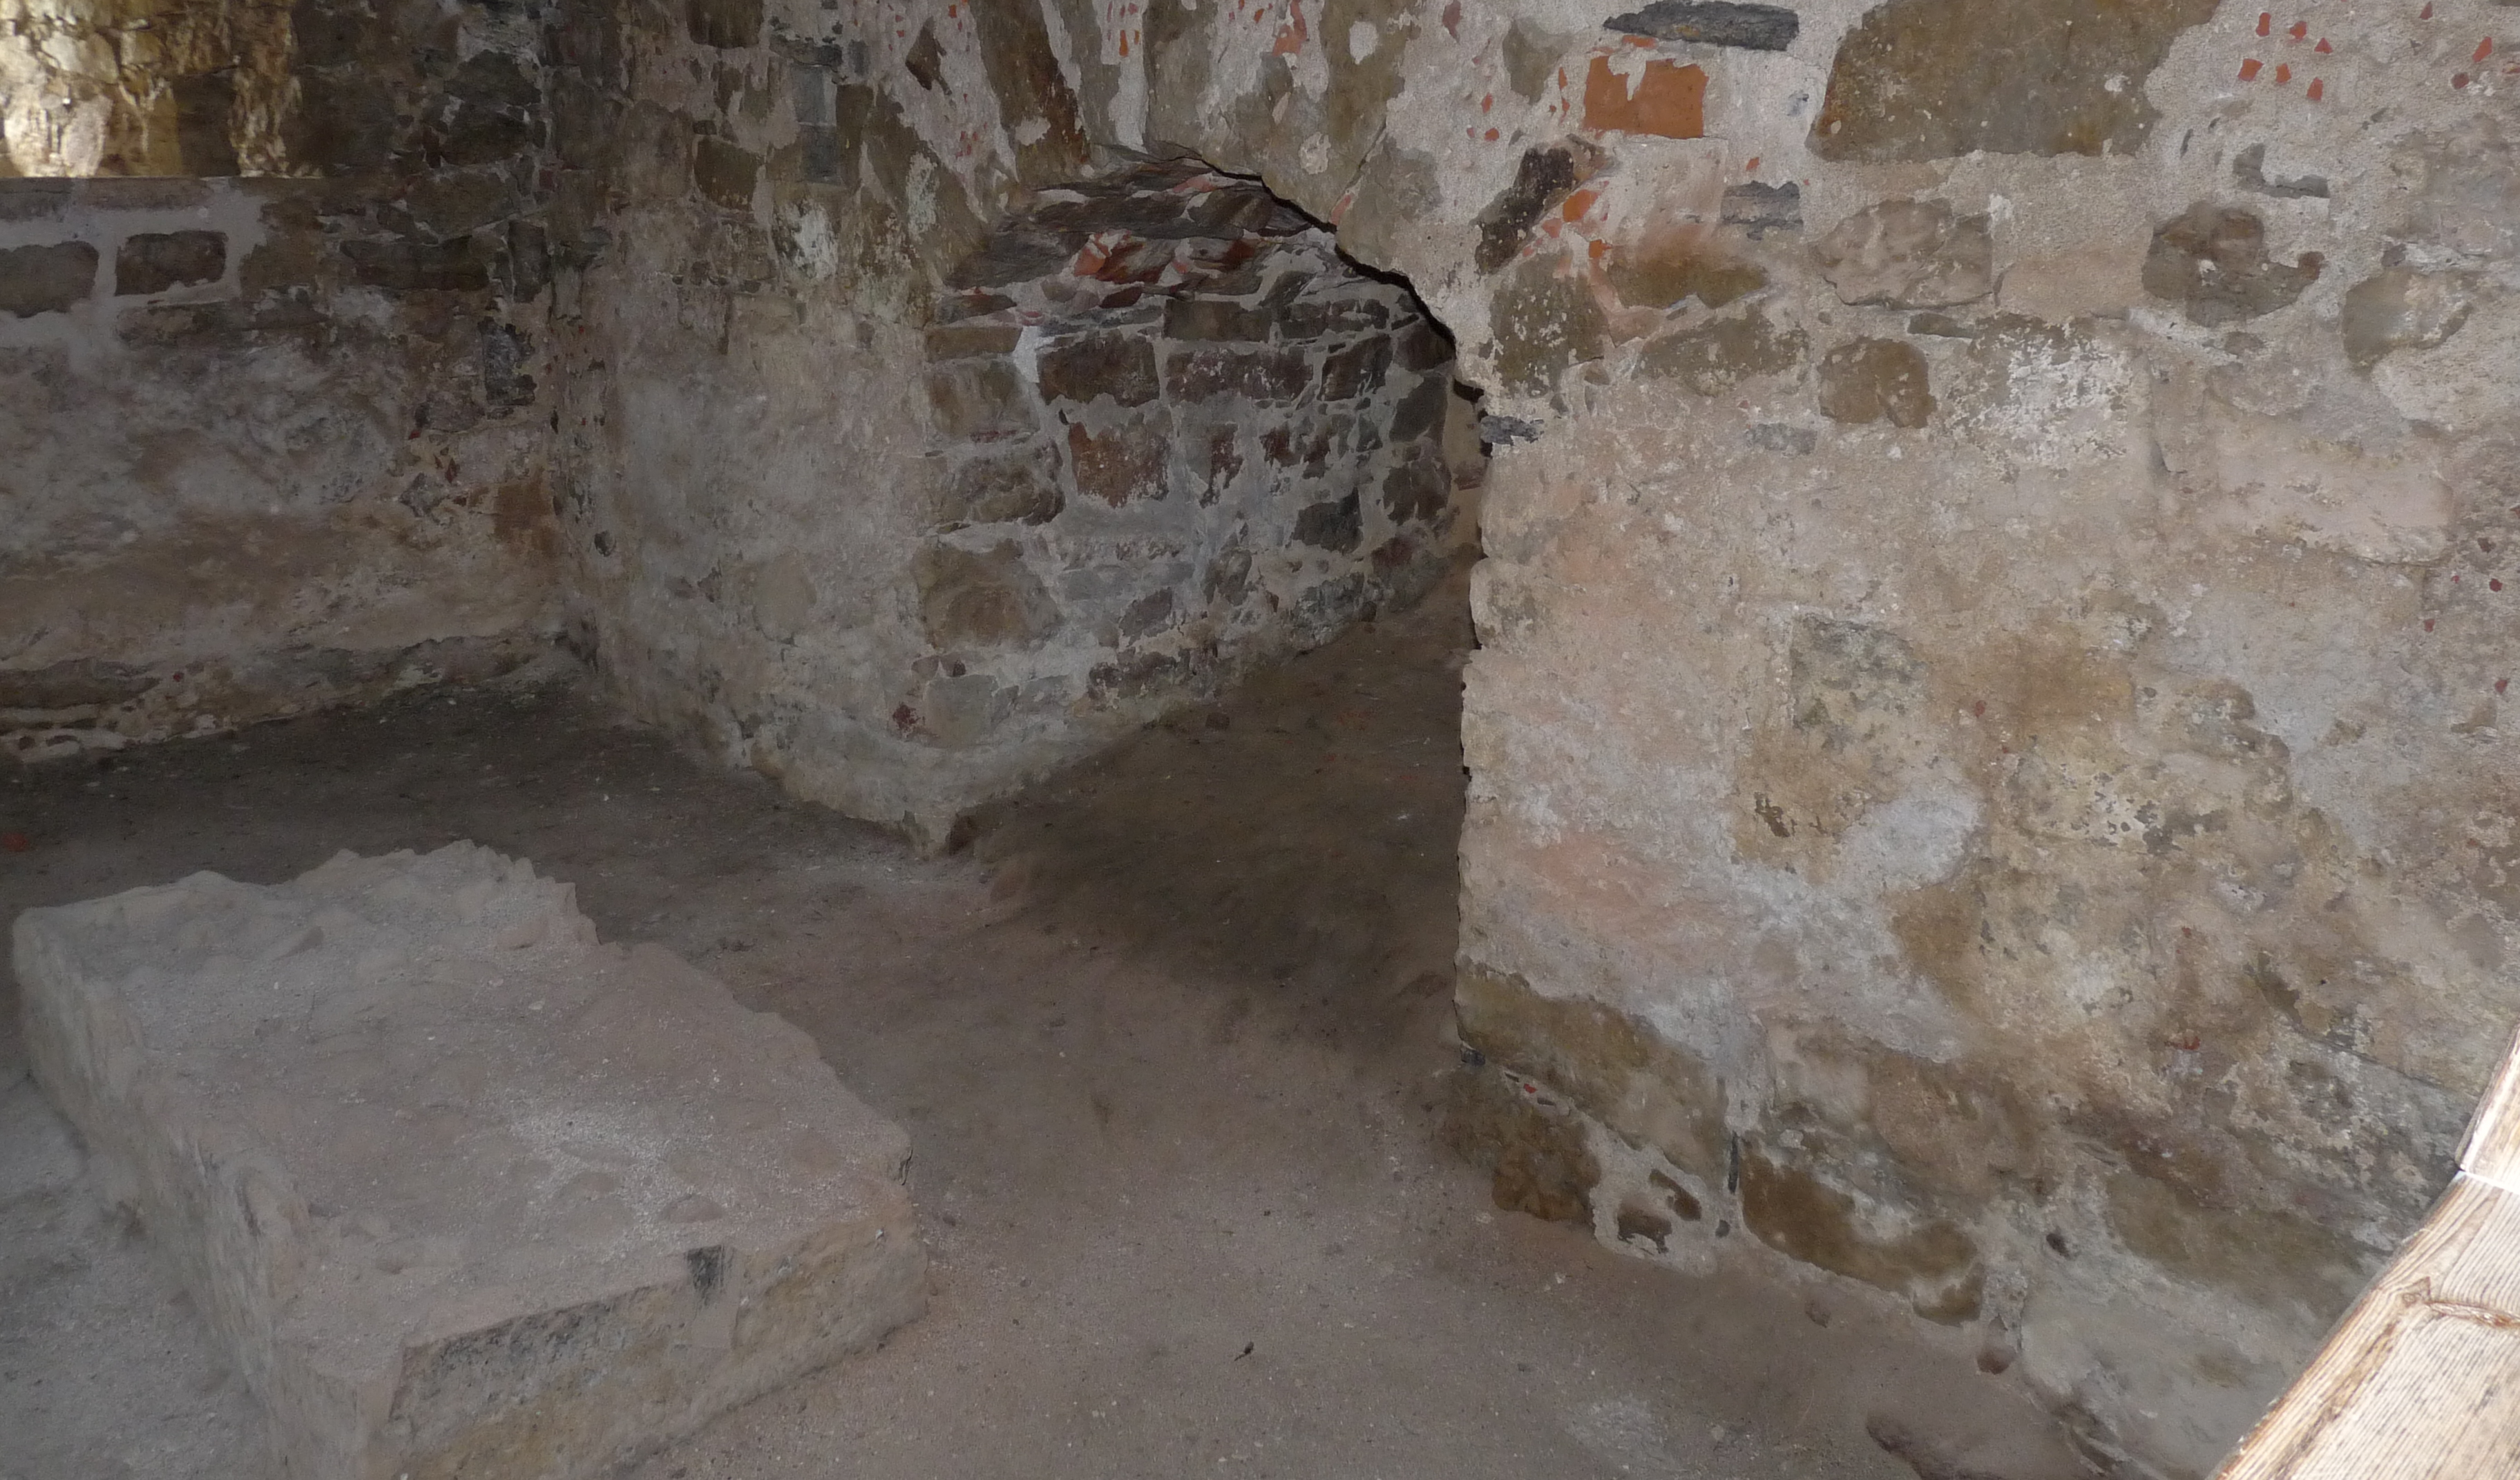 The picture shows part of the kitchen with a hearthstone on the left and a wall opening in the middle for heating the hypocaust.